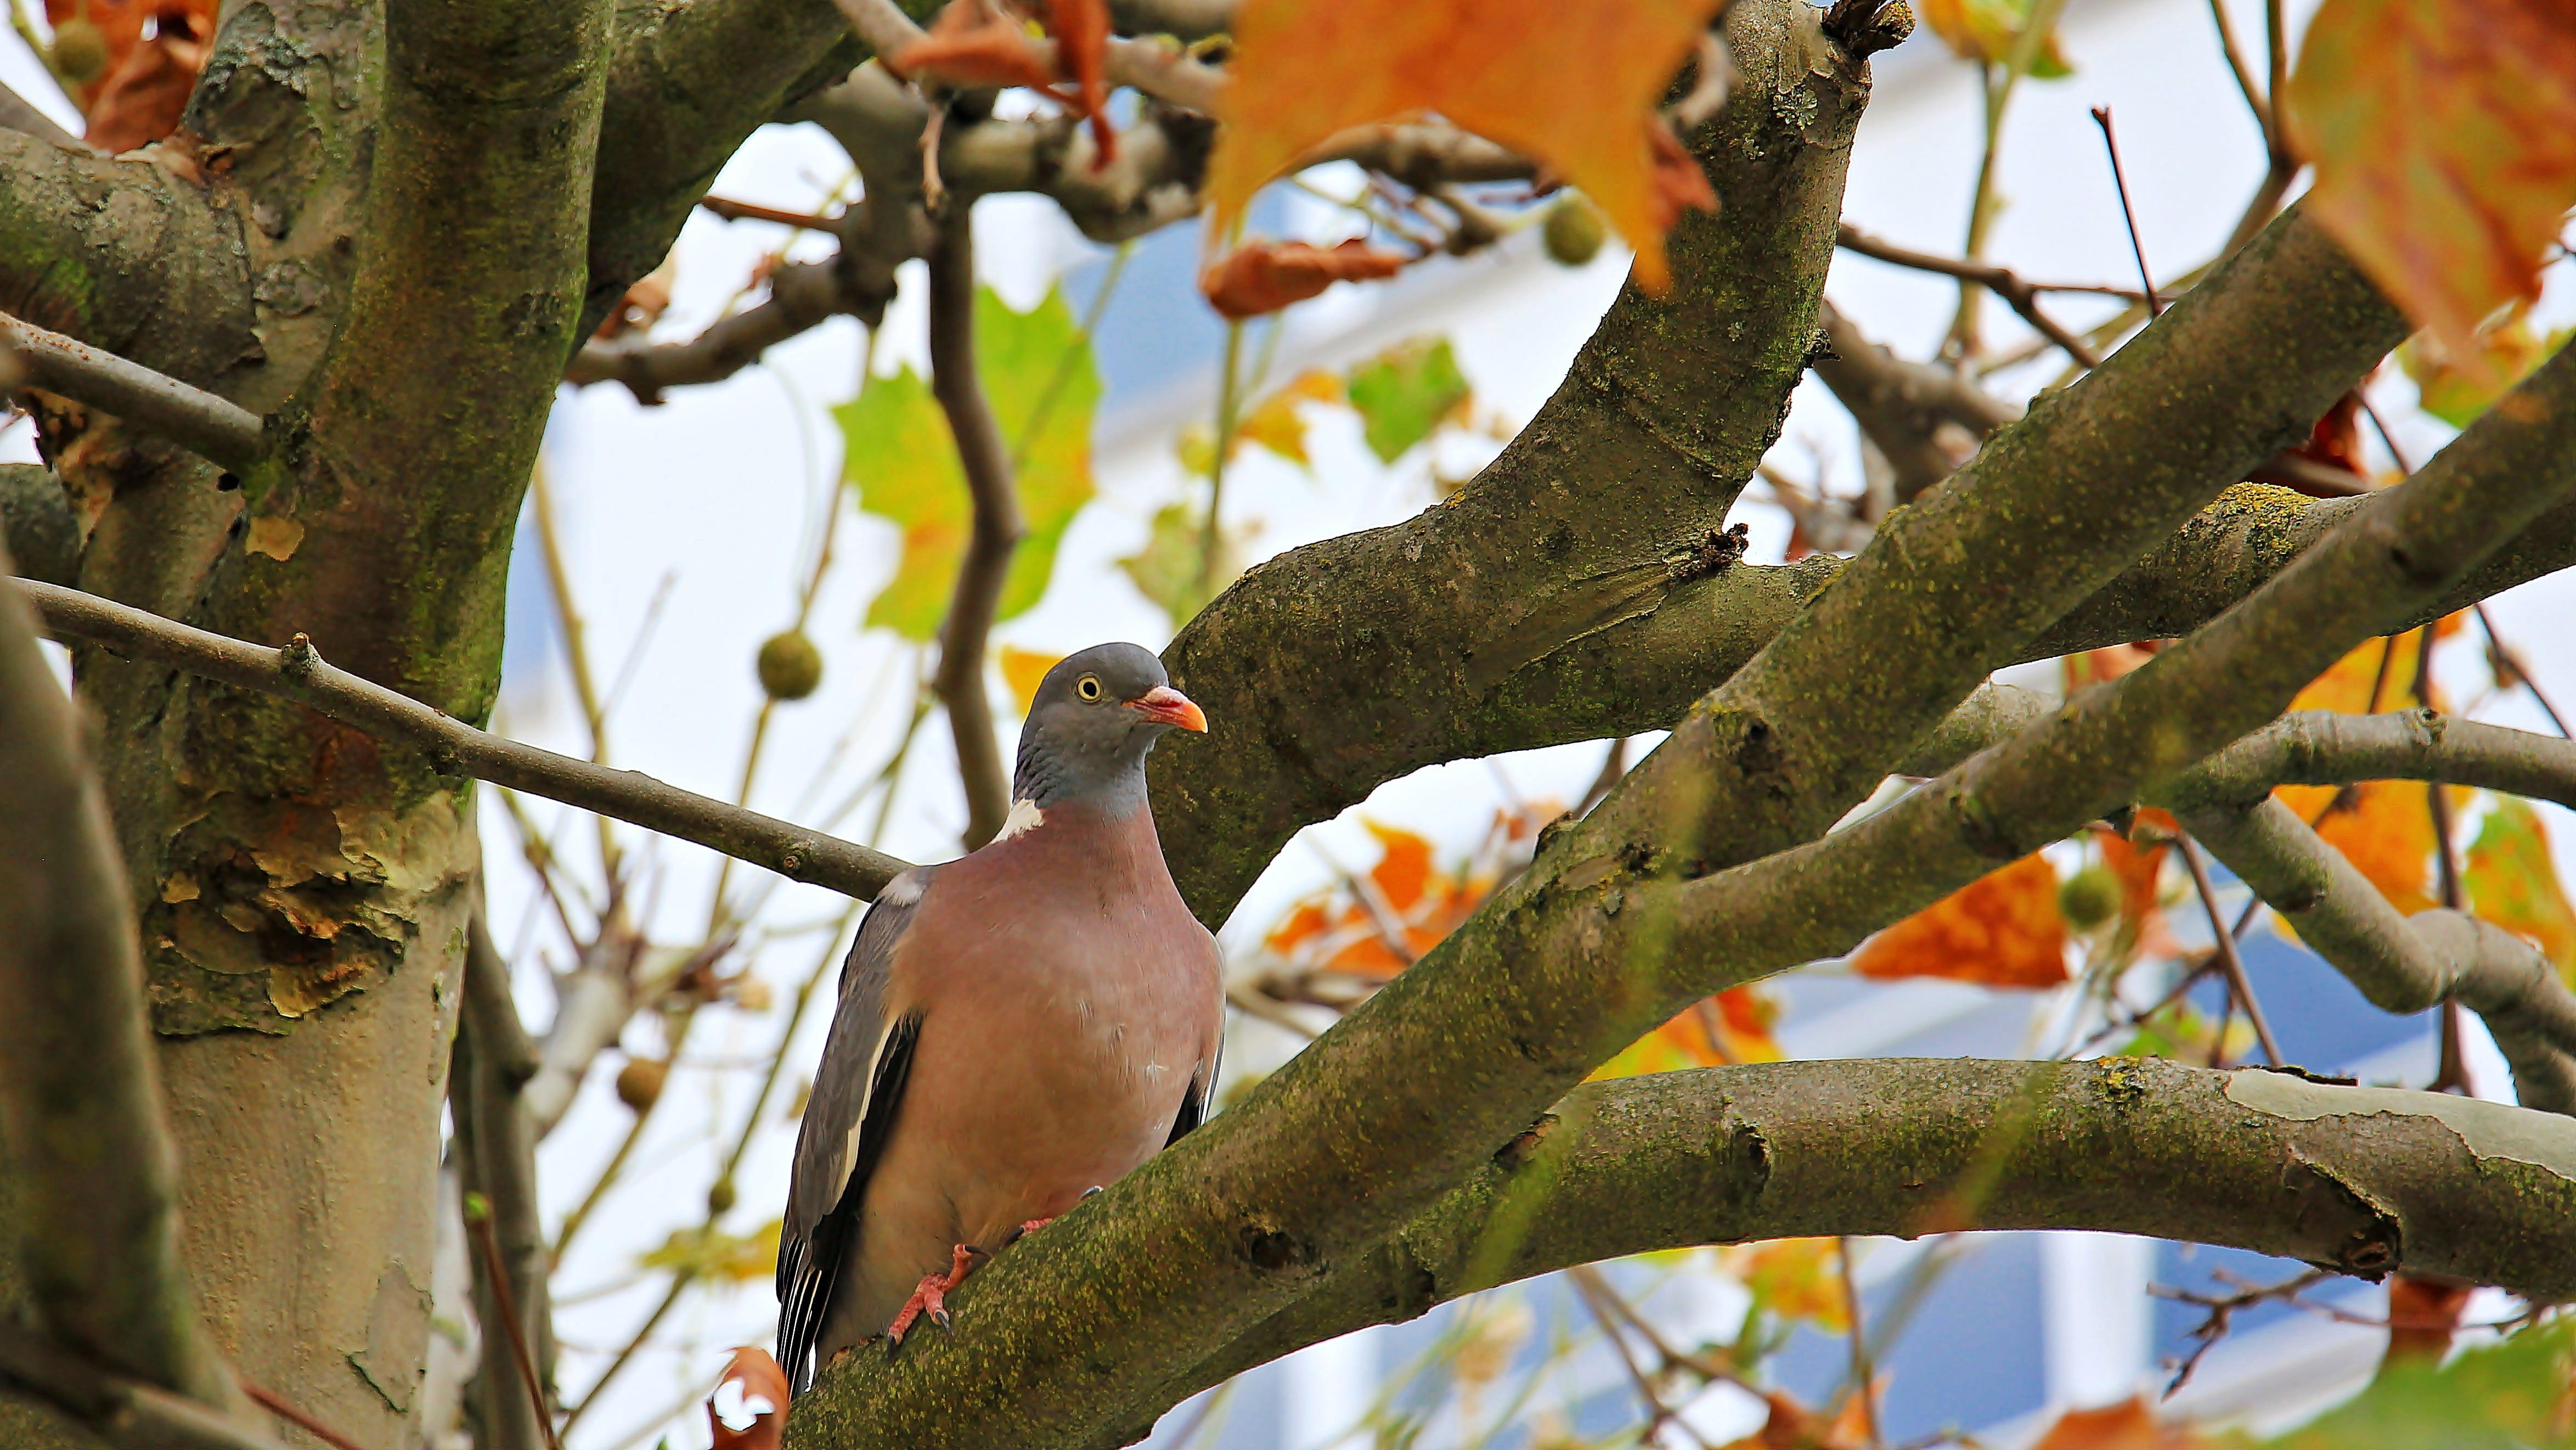 brown and grey pigeon perched on tree branch during daytime, bird